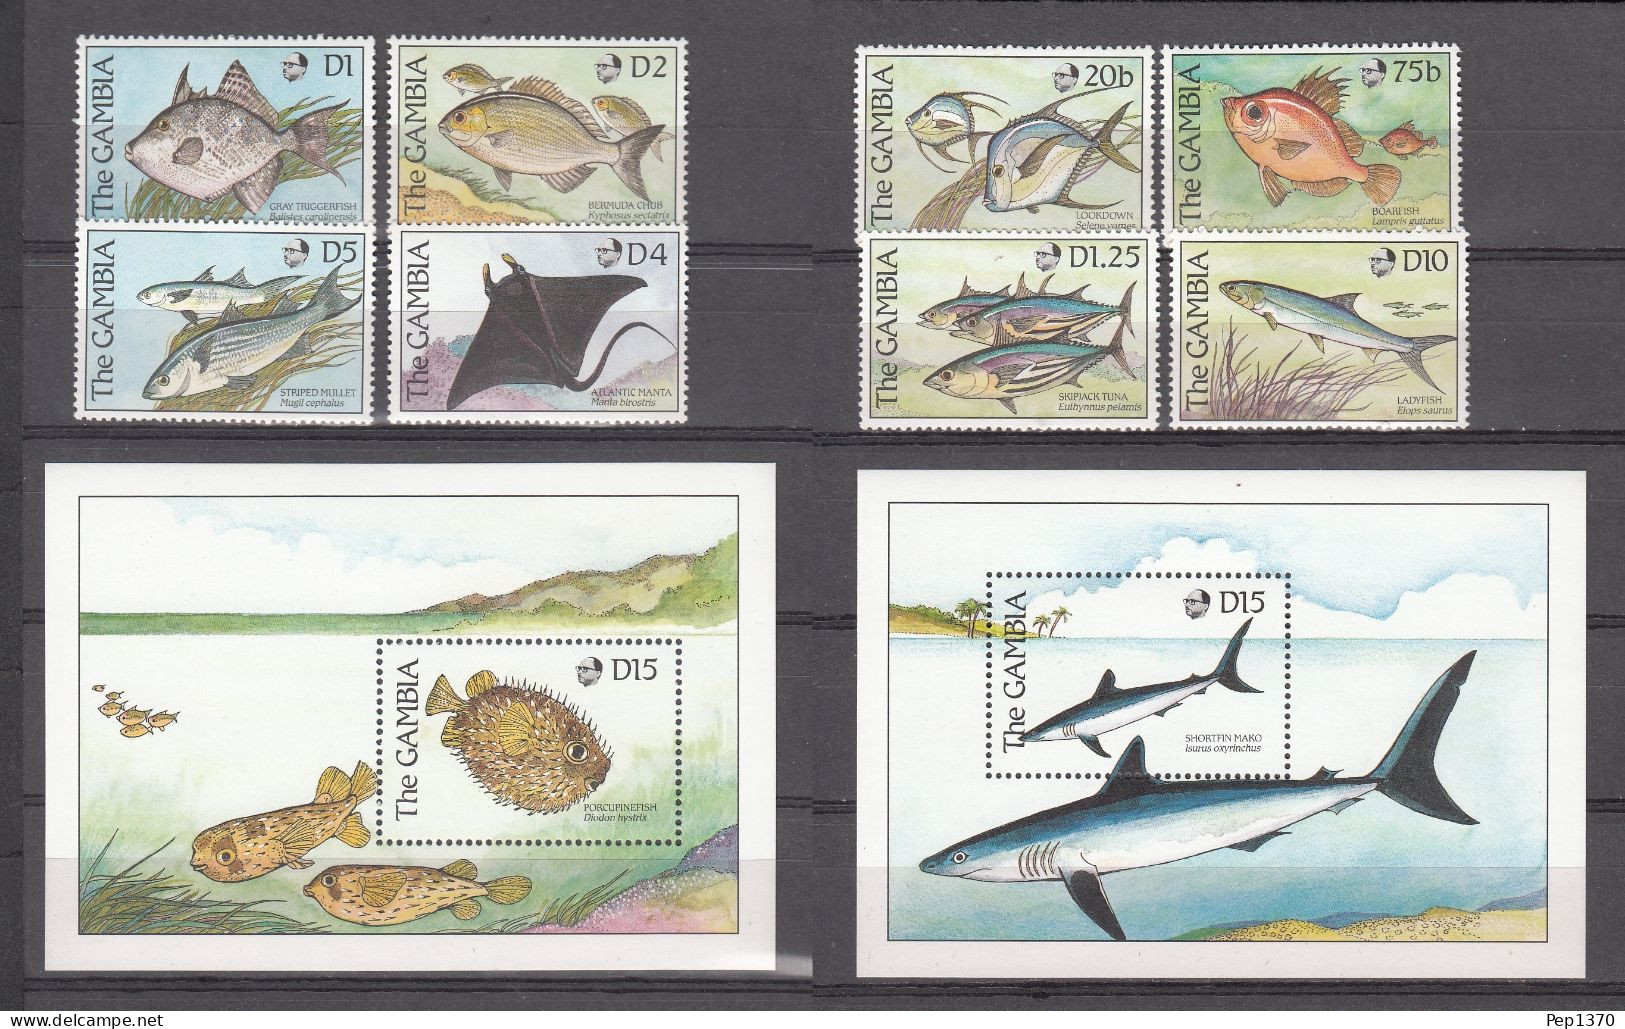 GAMBIA 1989 - PECES - FISHES - POISSONS - YVERT 829/832 + 837/840** + HB-74 + HB-76** - Peces